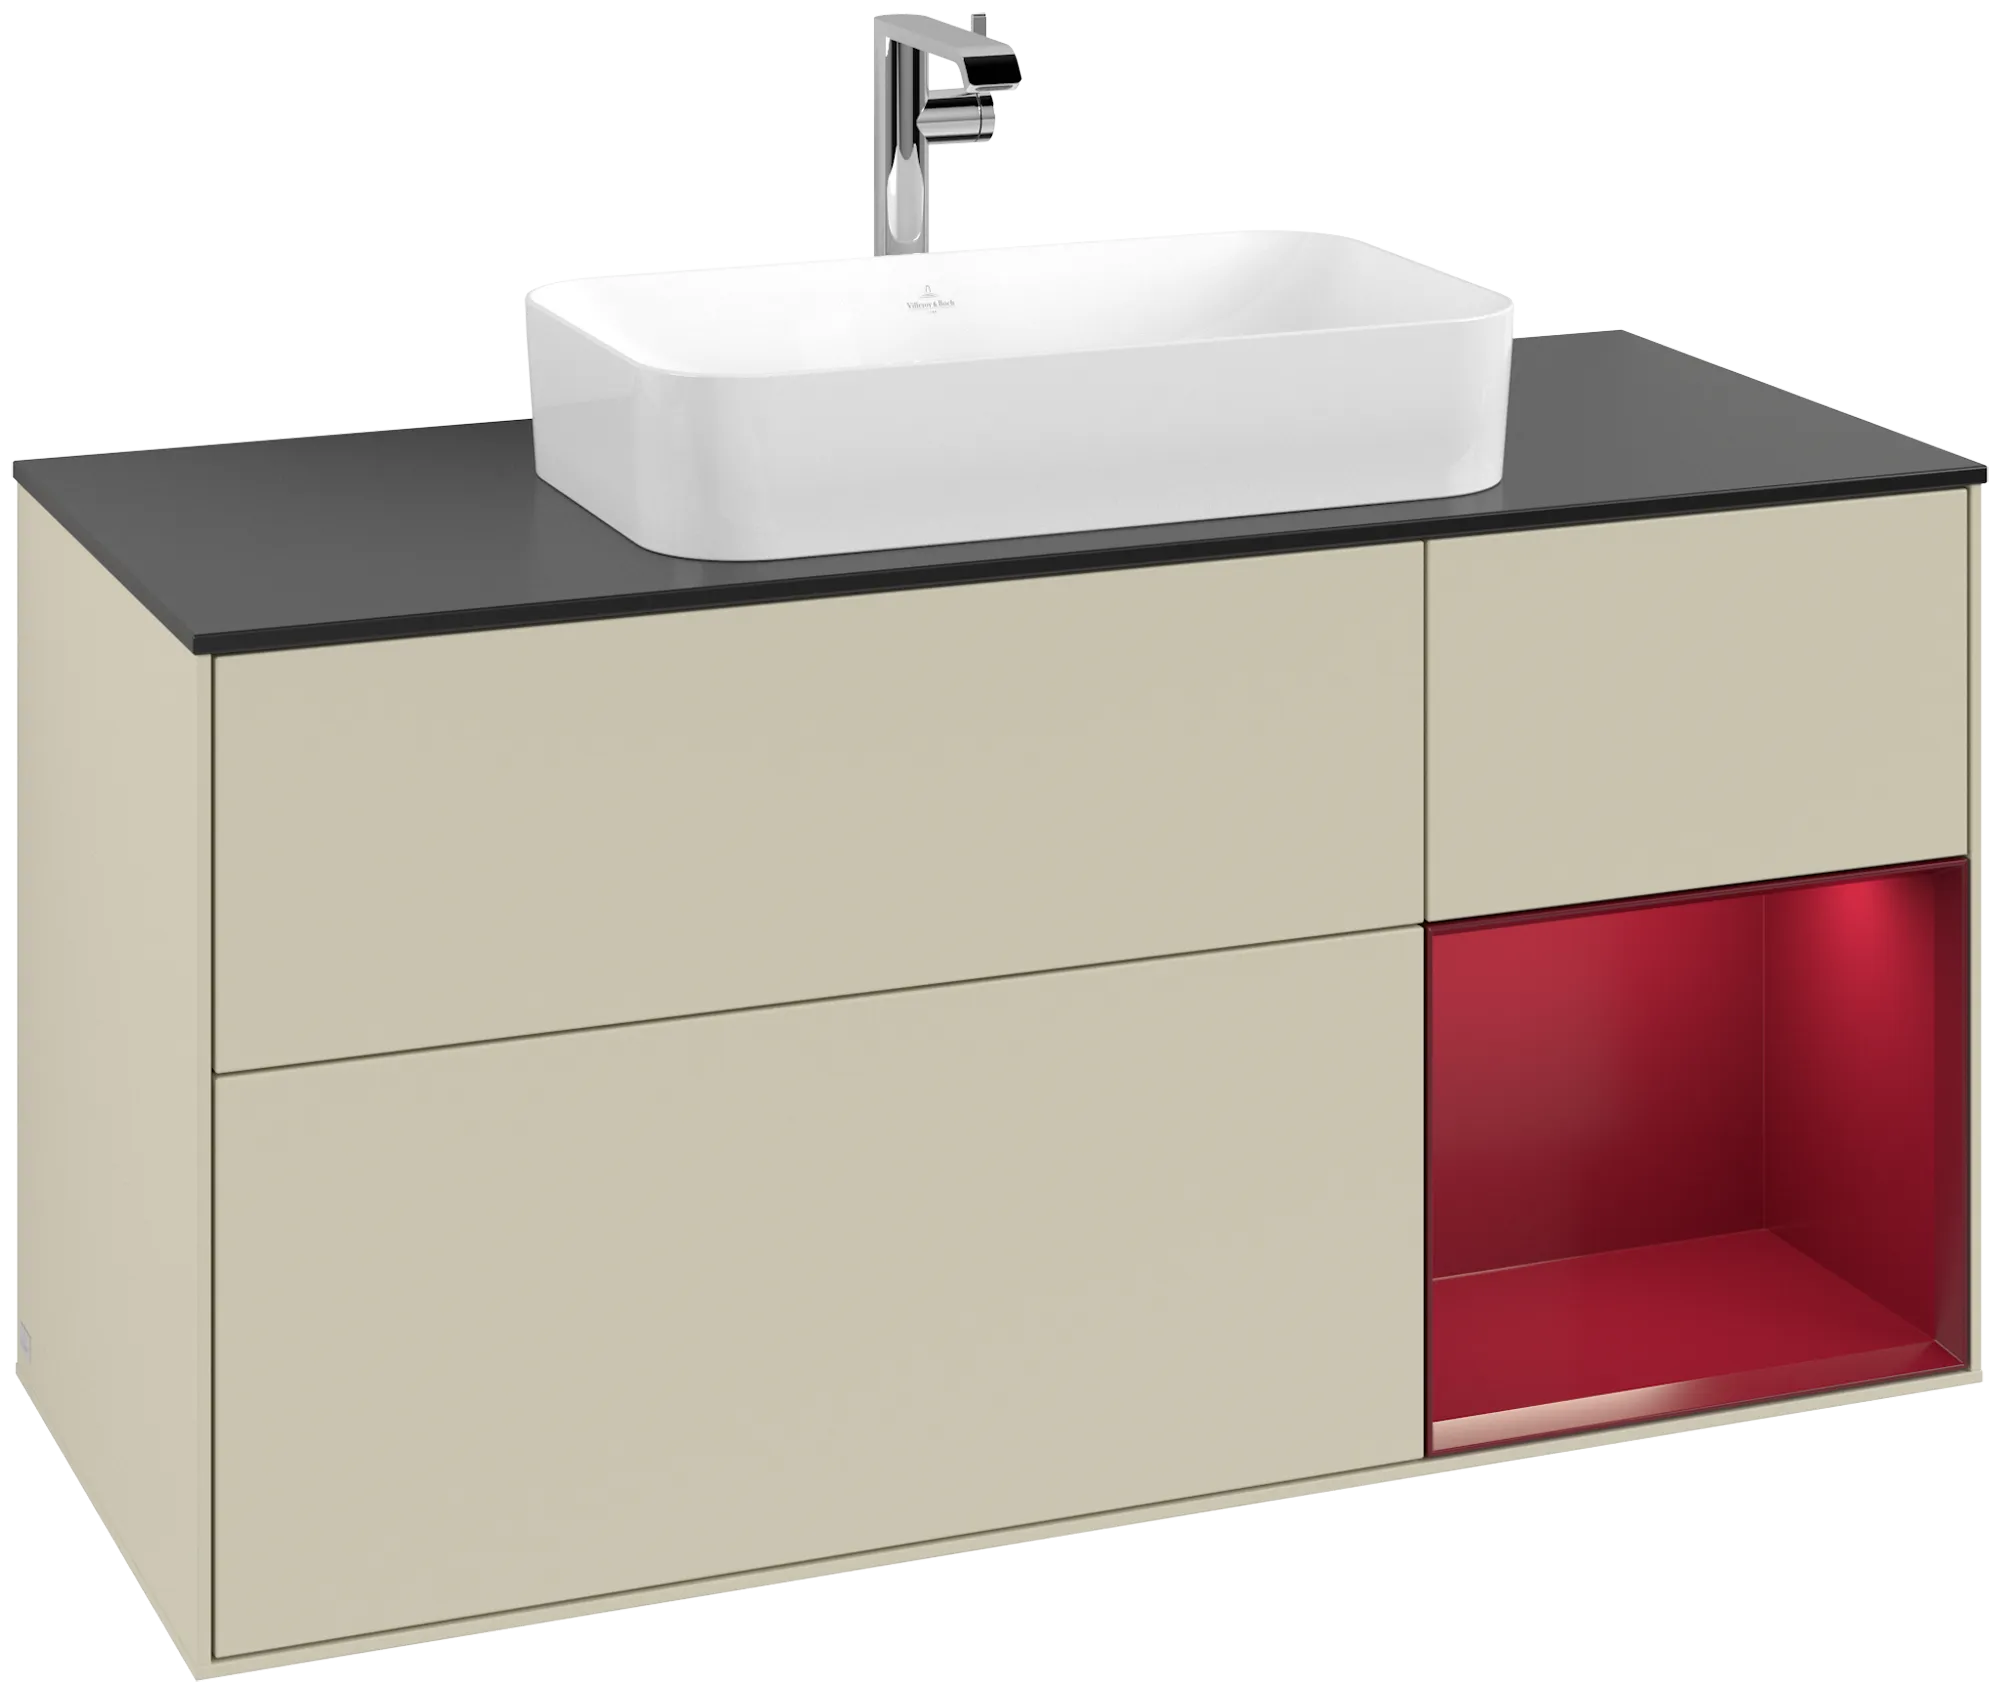 Picture of VILLEROY BOCH Finion Vanity unit, with lighting, 3 pull-out compartments, 1200 x 603 x 501 mm, Silk Grey Matt Lacquer / Peony Matt Lacquer / Glass Black Matt #G302HBHJ